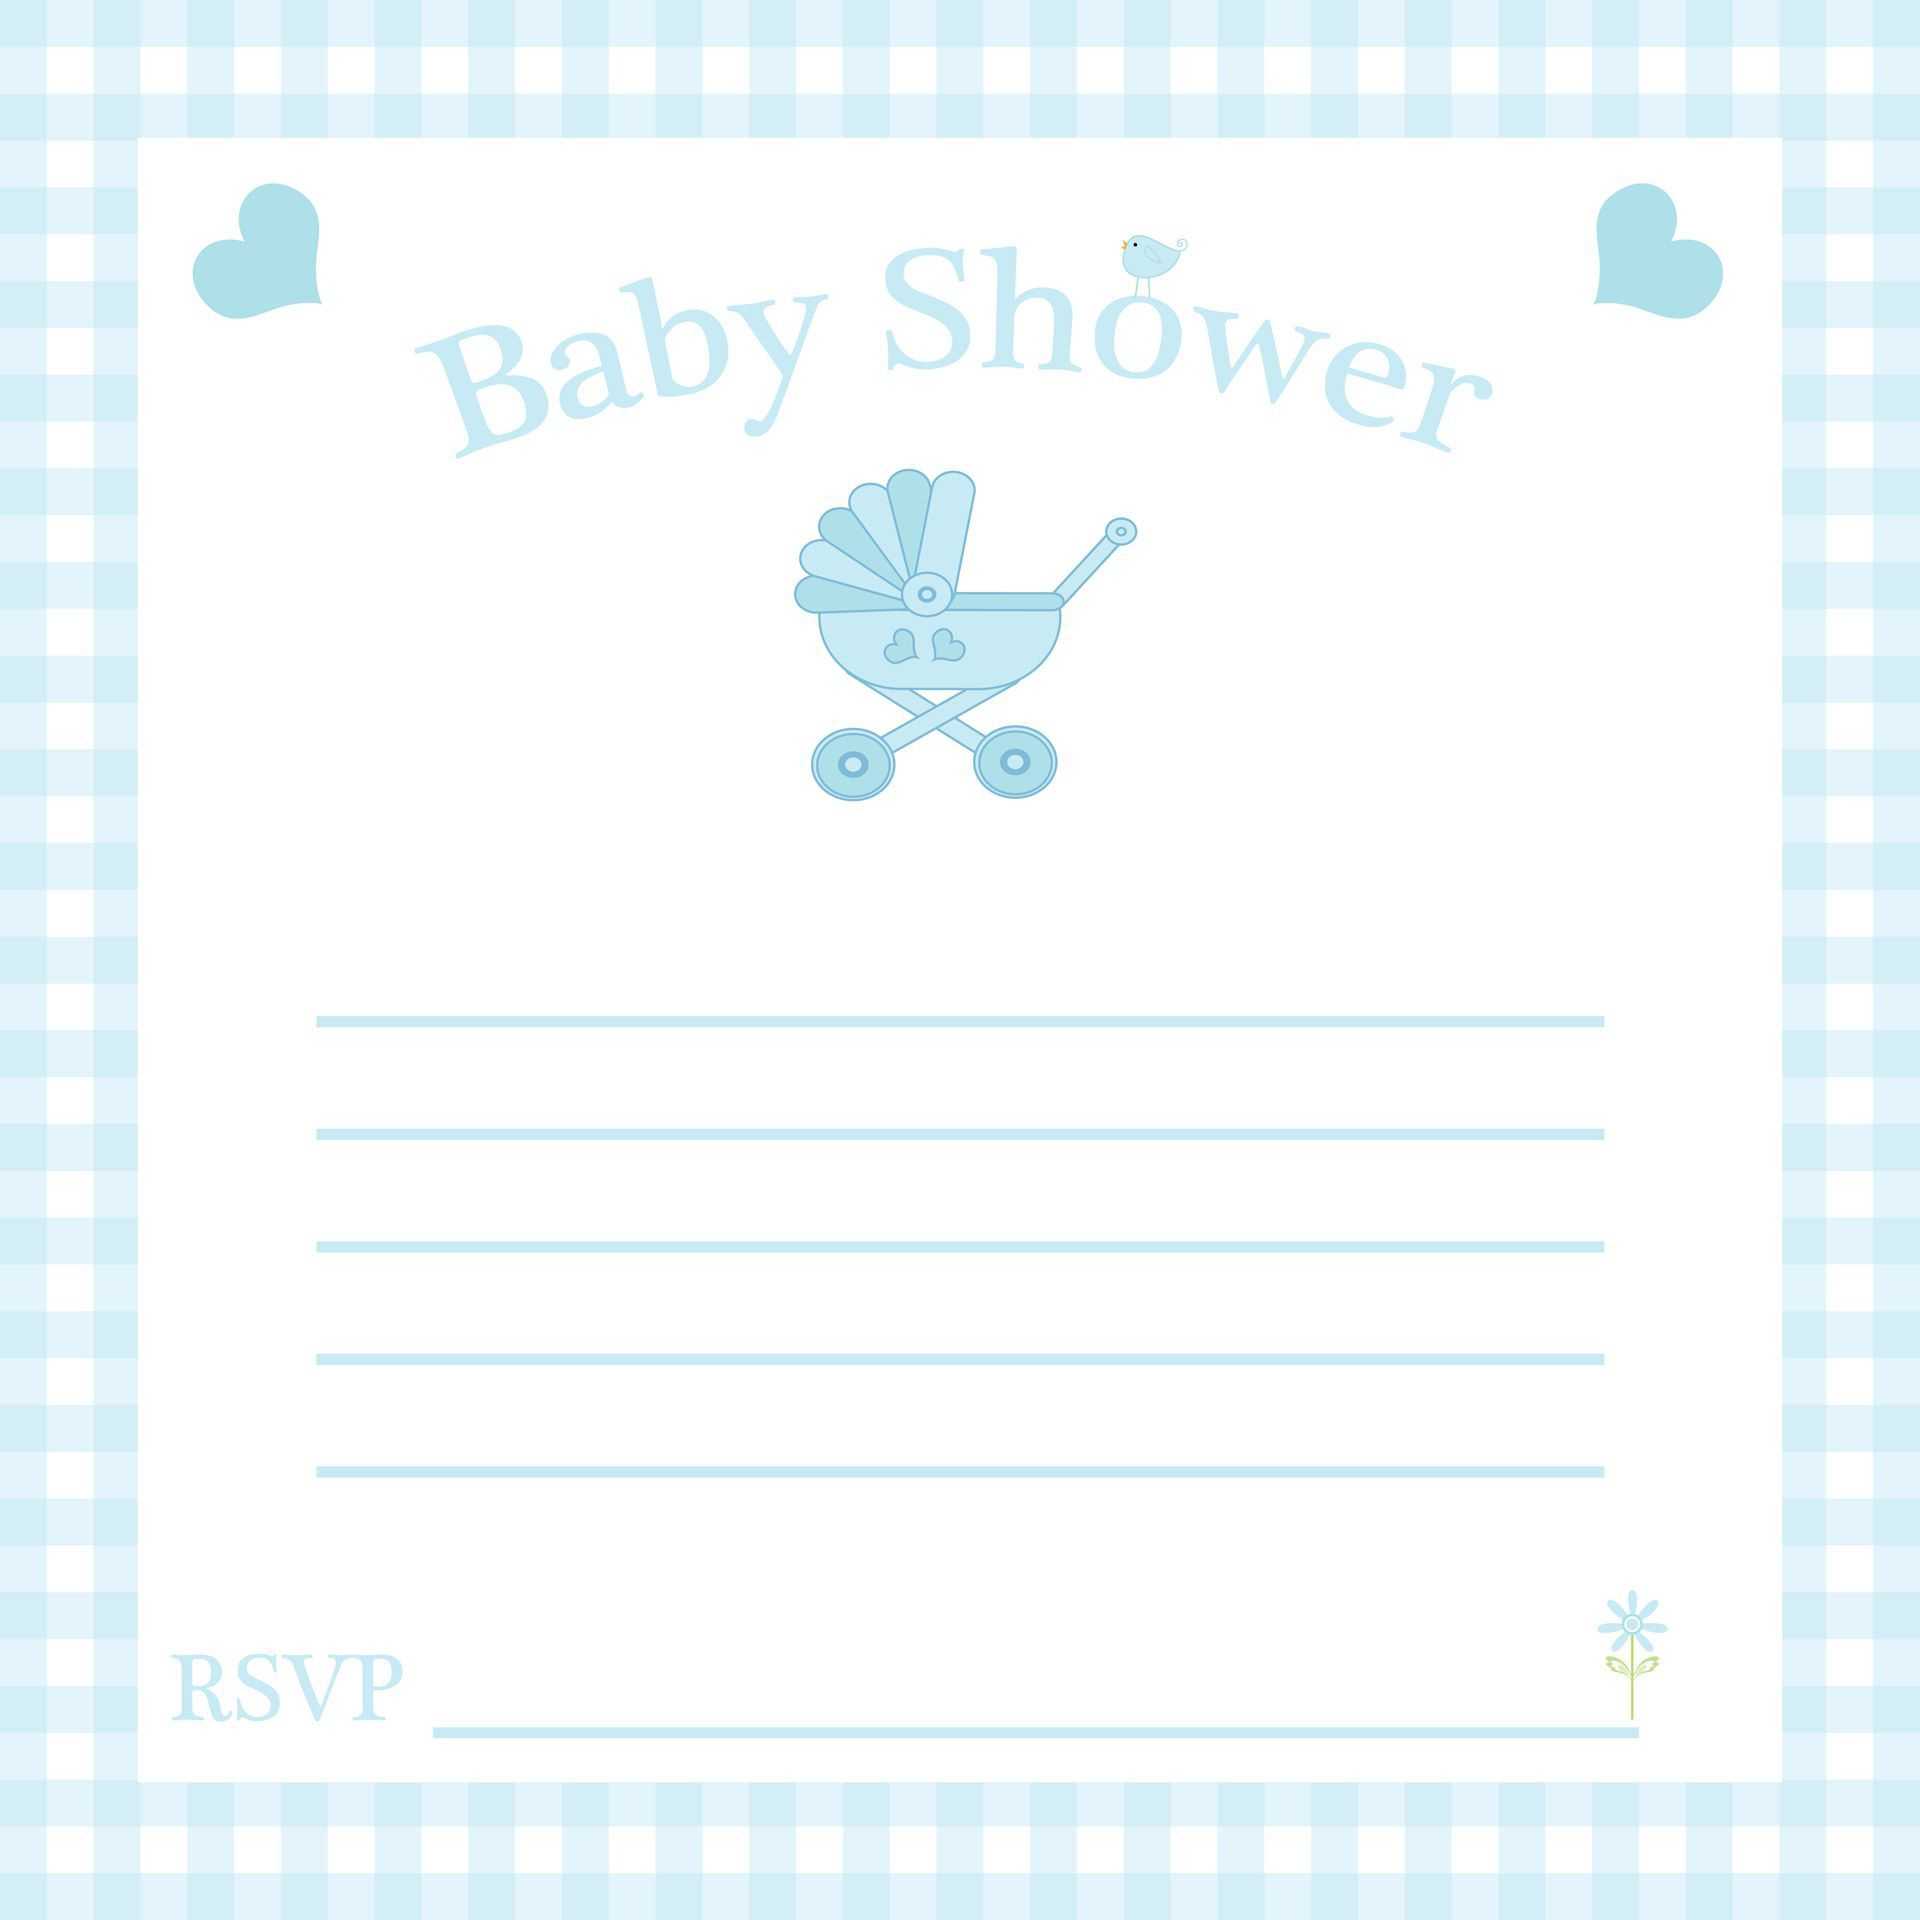 Popular Baby Shower Template For Invitation Ba Invite Design With Regard To Free Baby Shower Invitation Templates Microsoft Word